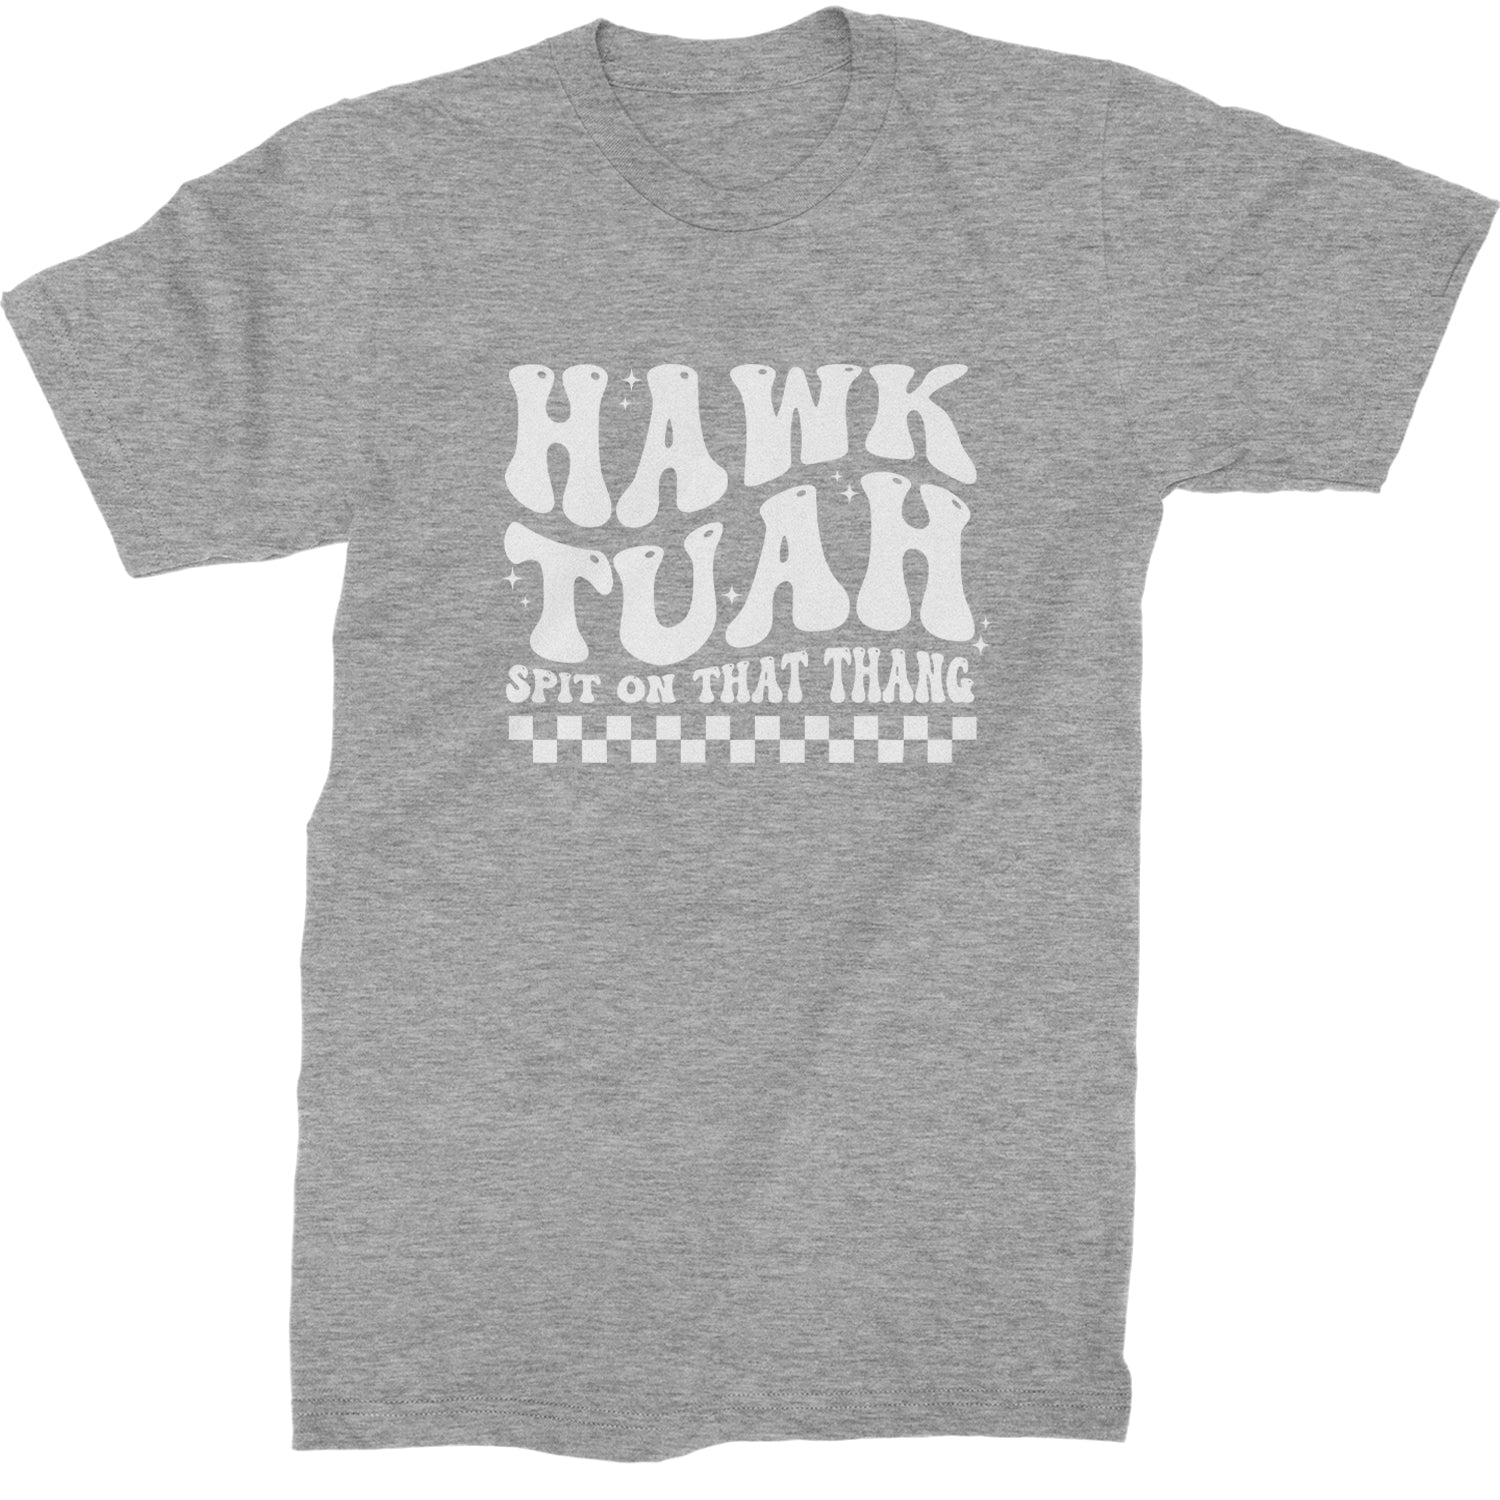 Hawk Tuah Spit On That Thang Mens T-shirt Heather Grey